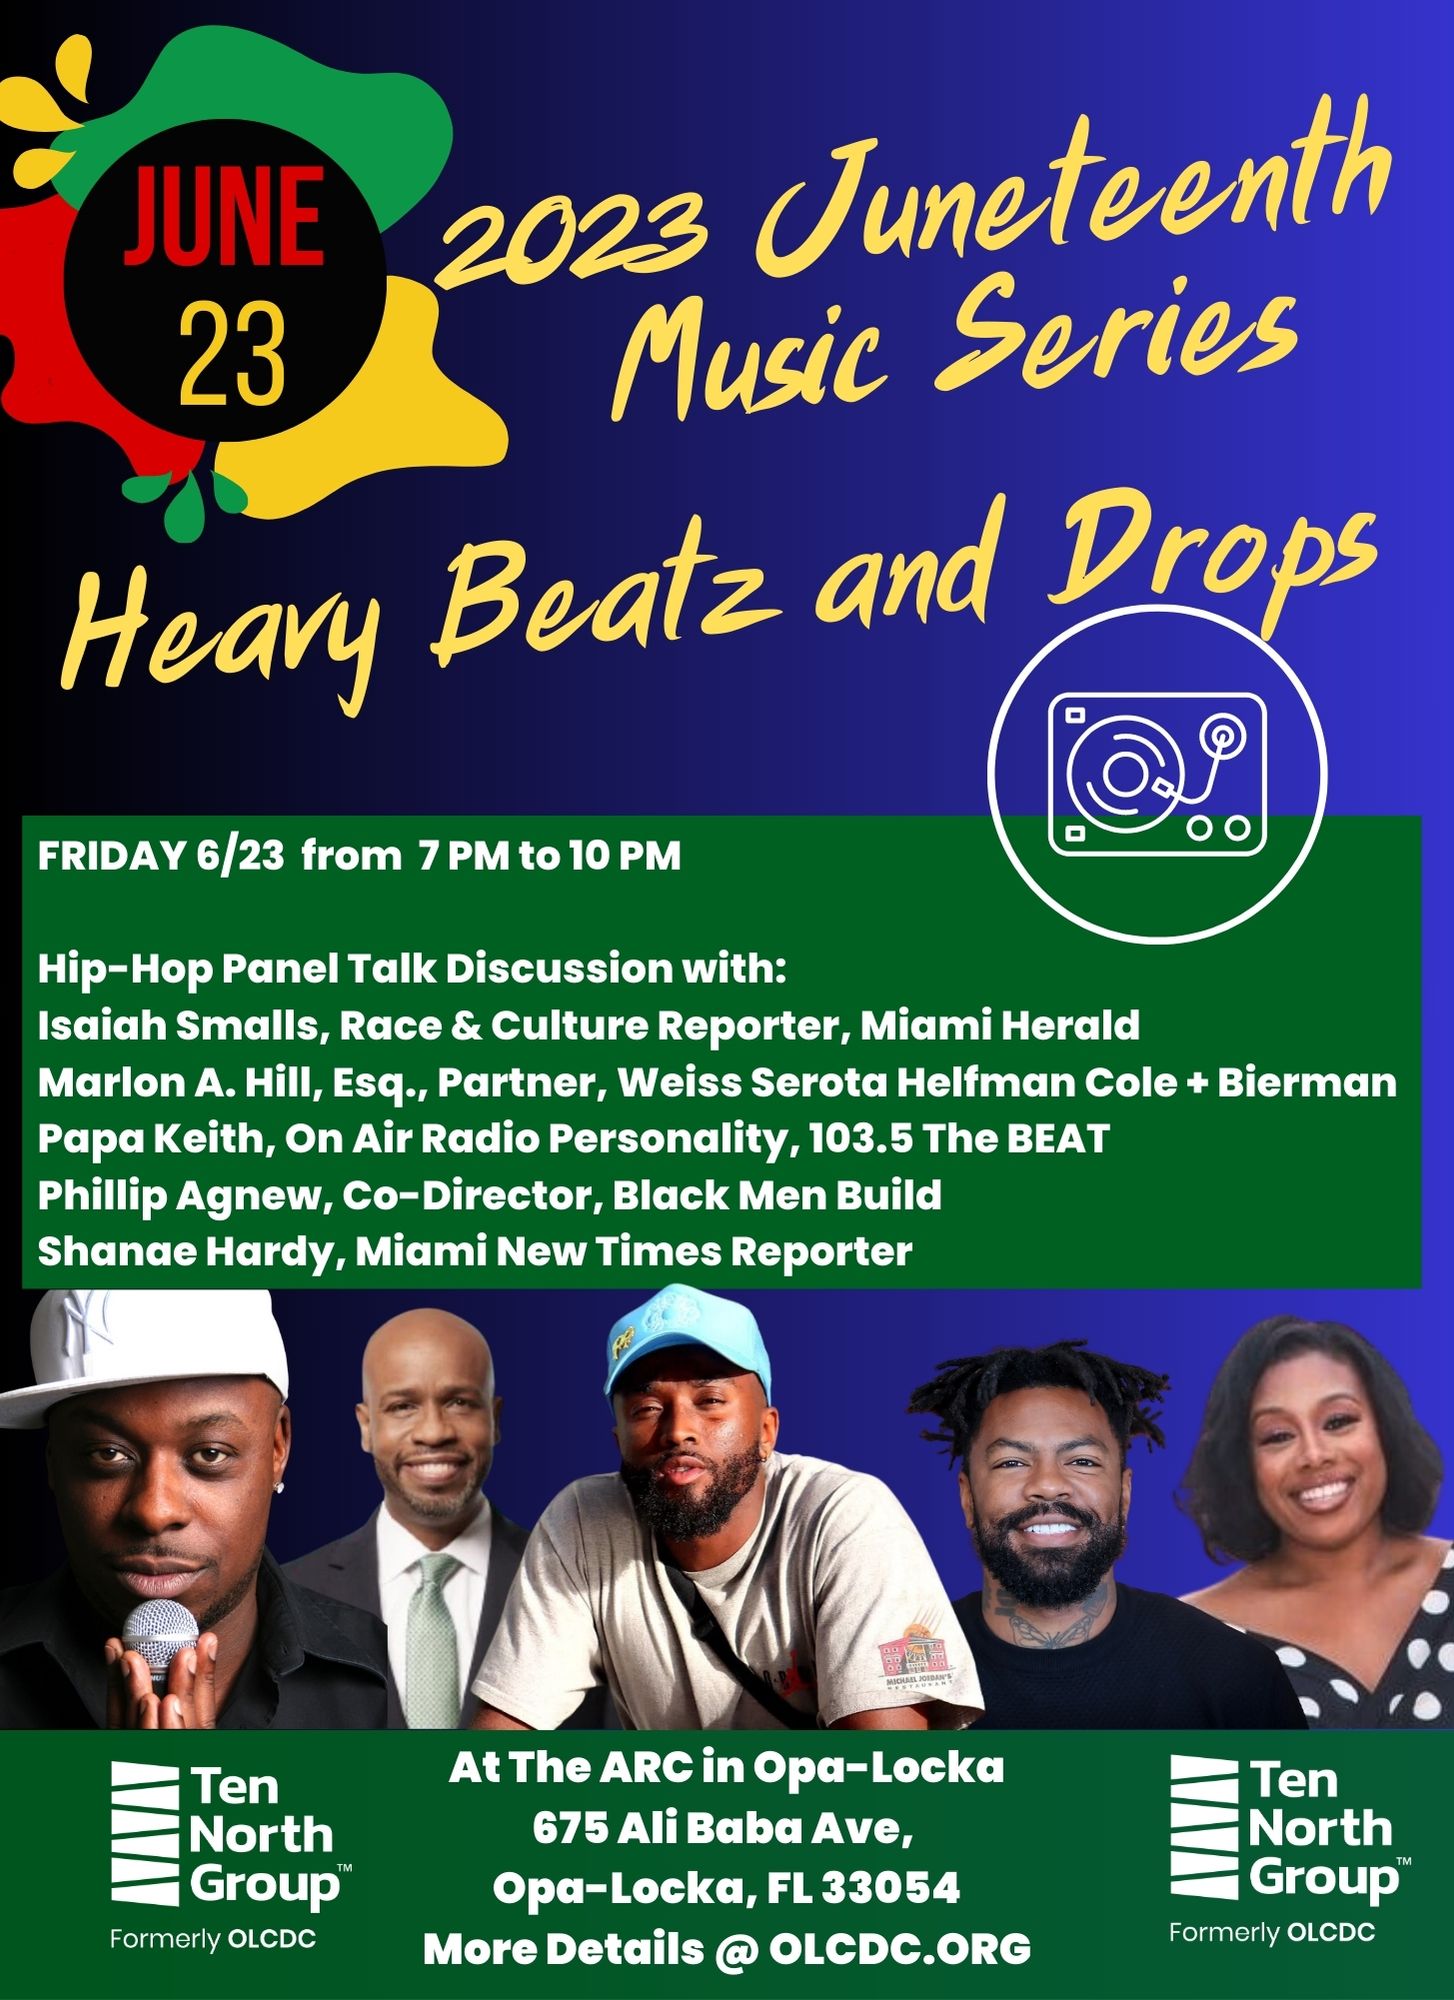 Heavy Beatz and Drops Juneteenth Celebration presented by Ten North ...